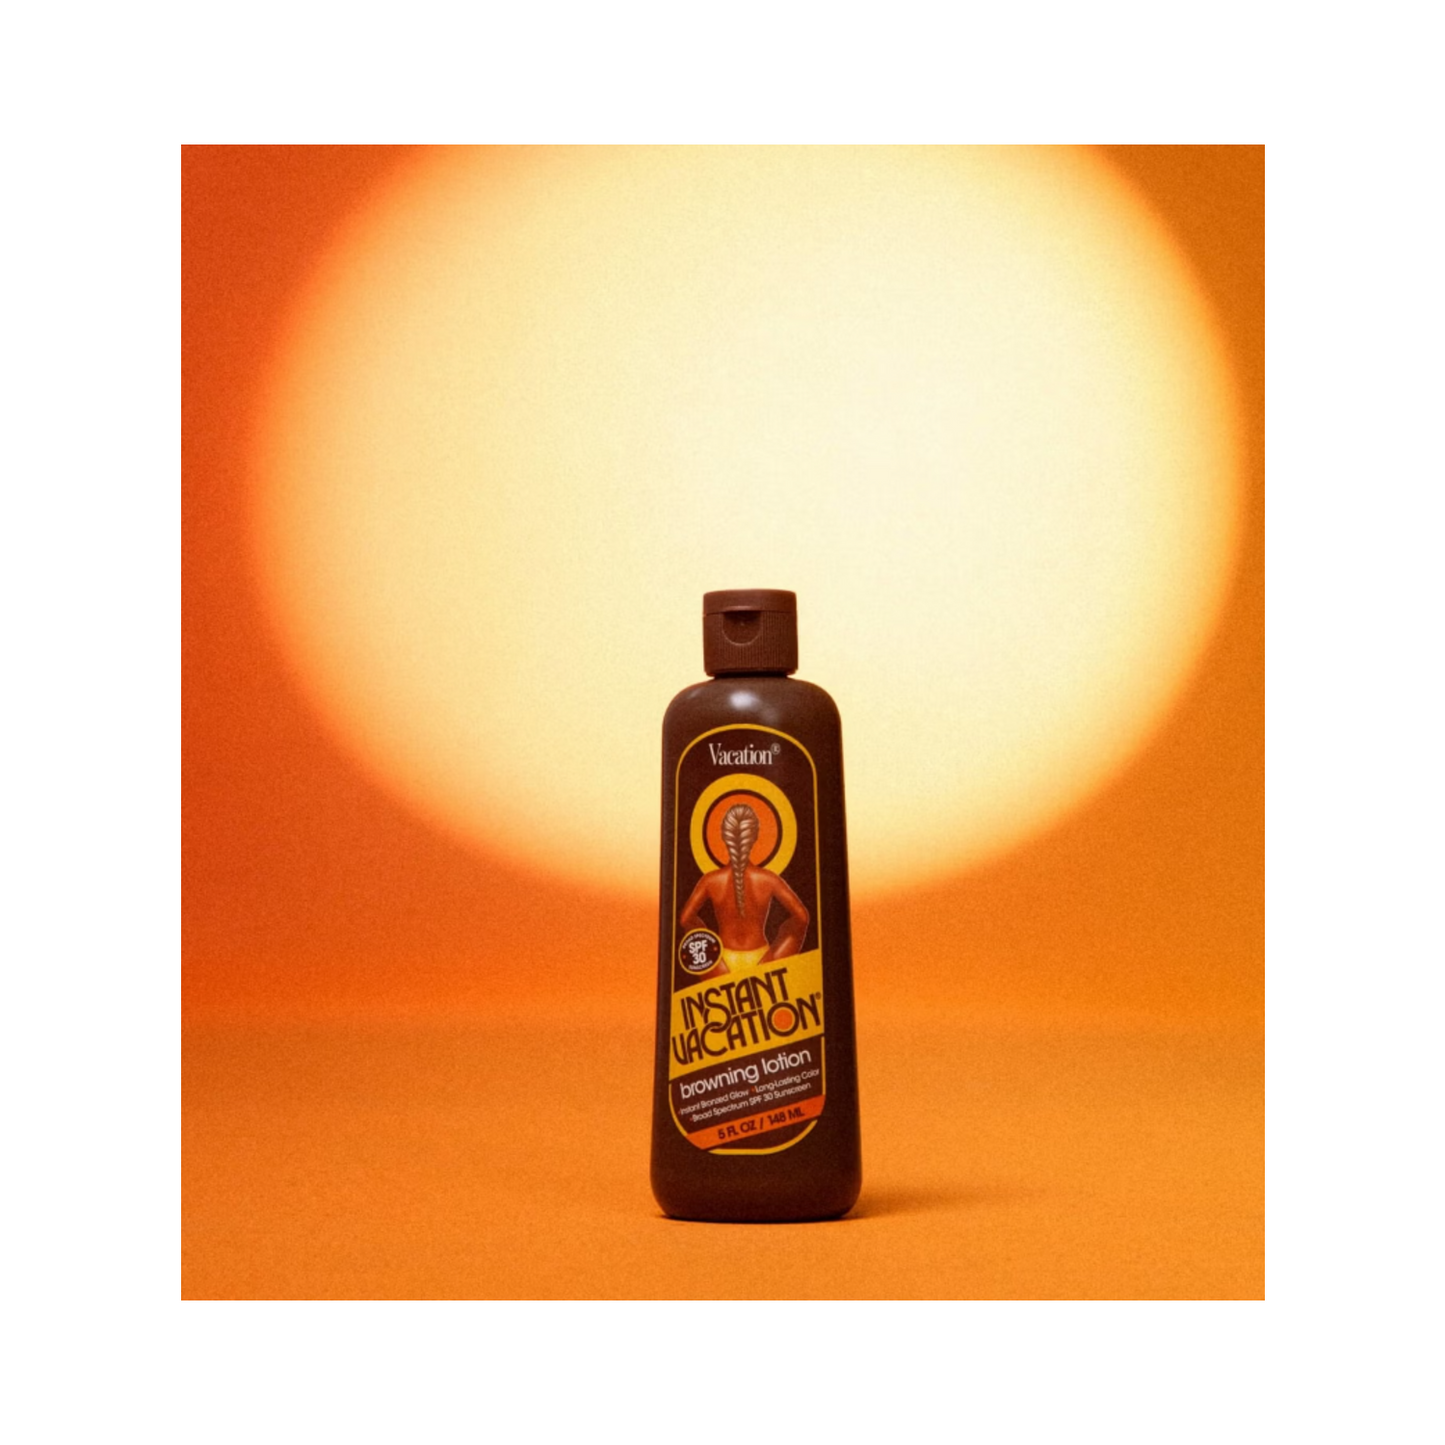 Vacation Instant Browning Lotion SPF 30